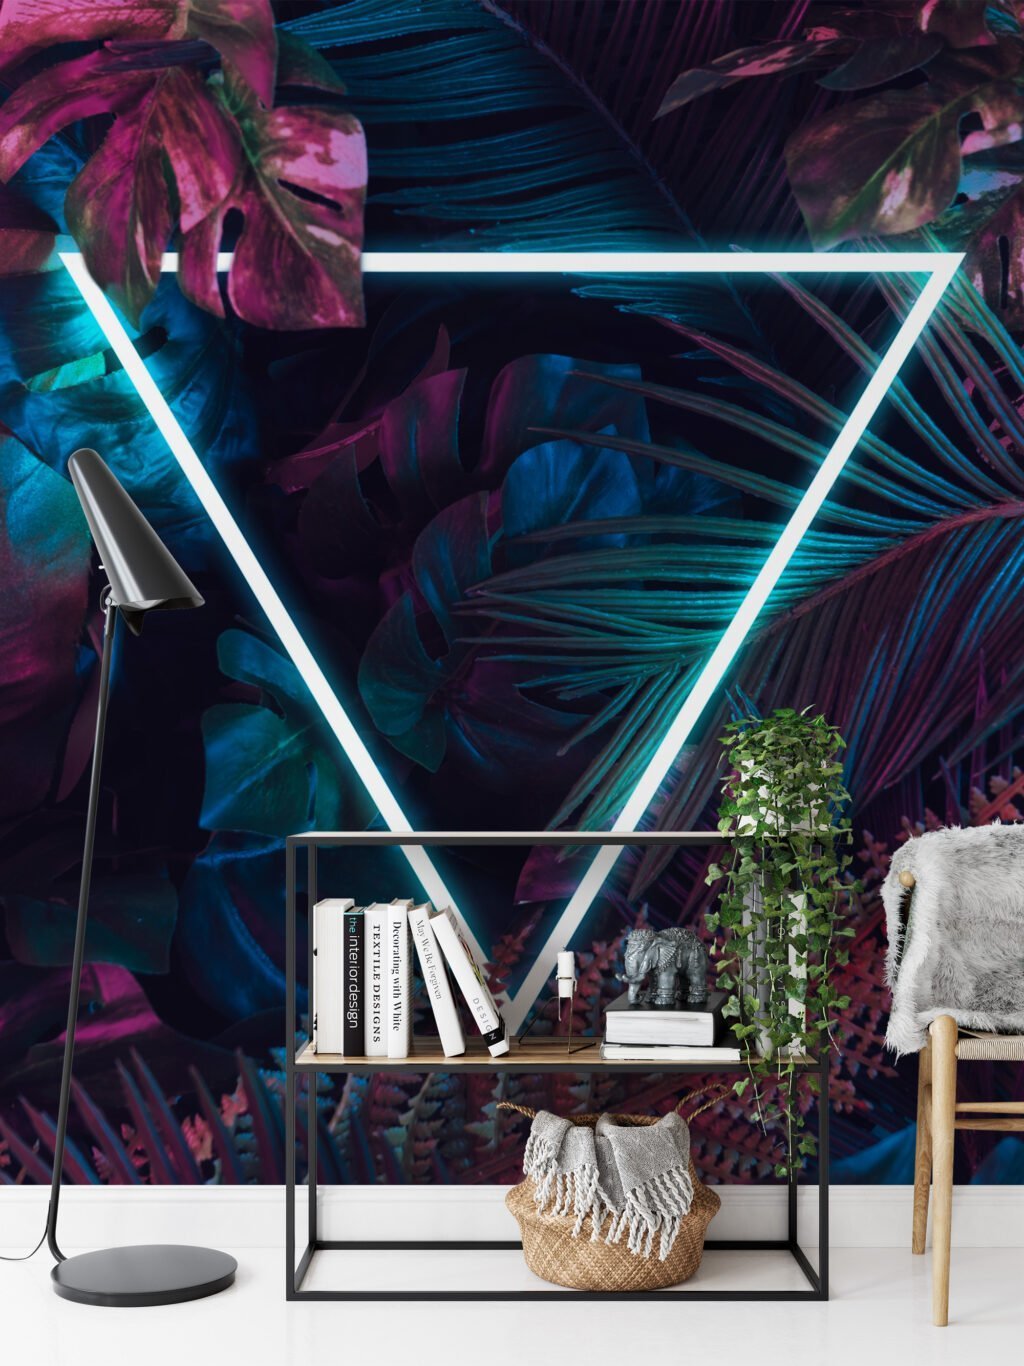 Vibrant Neon Pink and Blue Tropical Leaves with a Centered Triangle Light - Self-Adhesive Peel and Stick Geometric Wallpaper with Botanical Flair